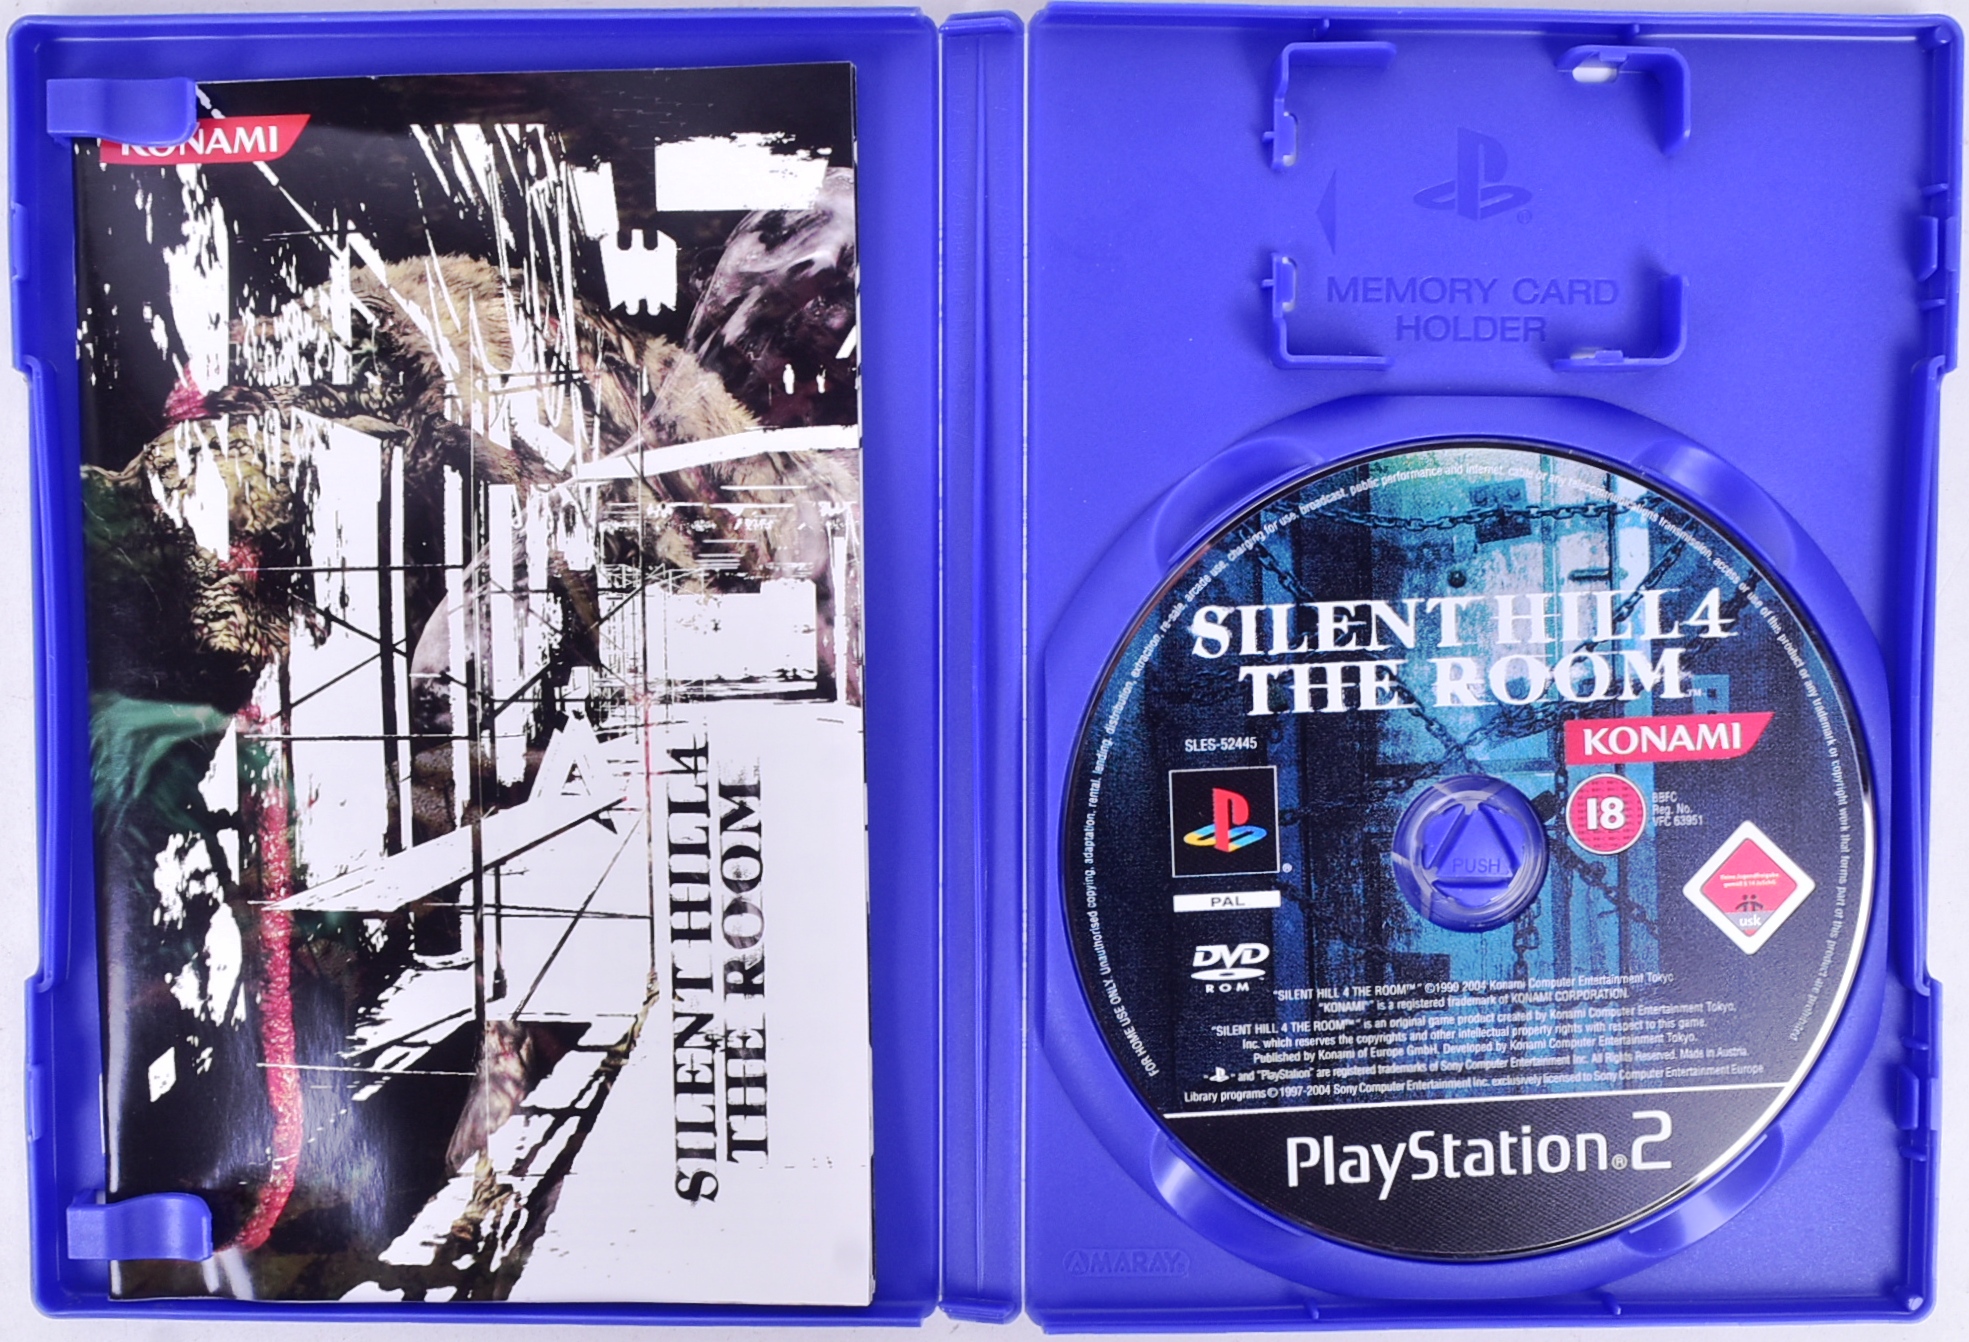 RETRO GAMING - PLAYSTATION 2 - SILENT HILL 2 3 & 4 - Image 4 of 5